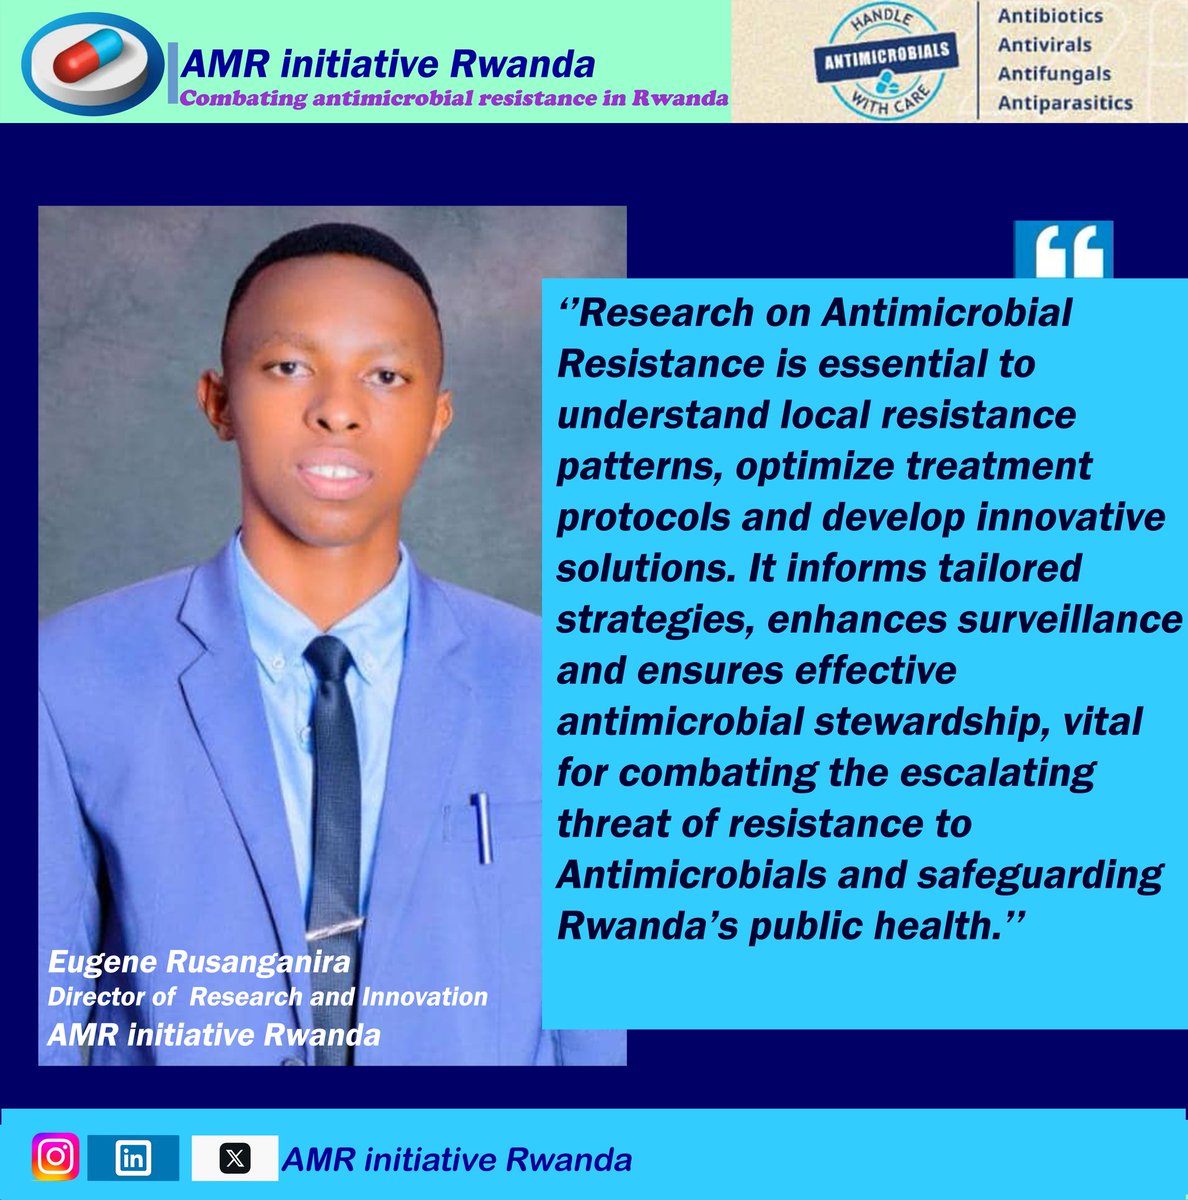 #MeetTheTeam. @amr_initiative, We envision a Rwanda🇷🇼 where #Antimicrobials are used responsibly. Preserving their effectiveness for current & future generations, with empowered #Youth at the forefront of this transformative change. We want this in #Rwanda. #YouthagainstAMR